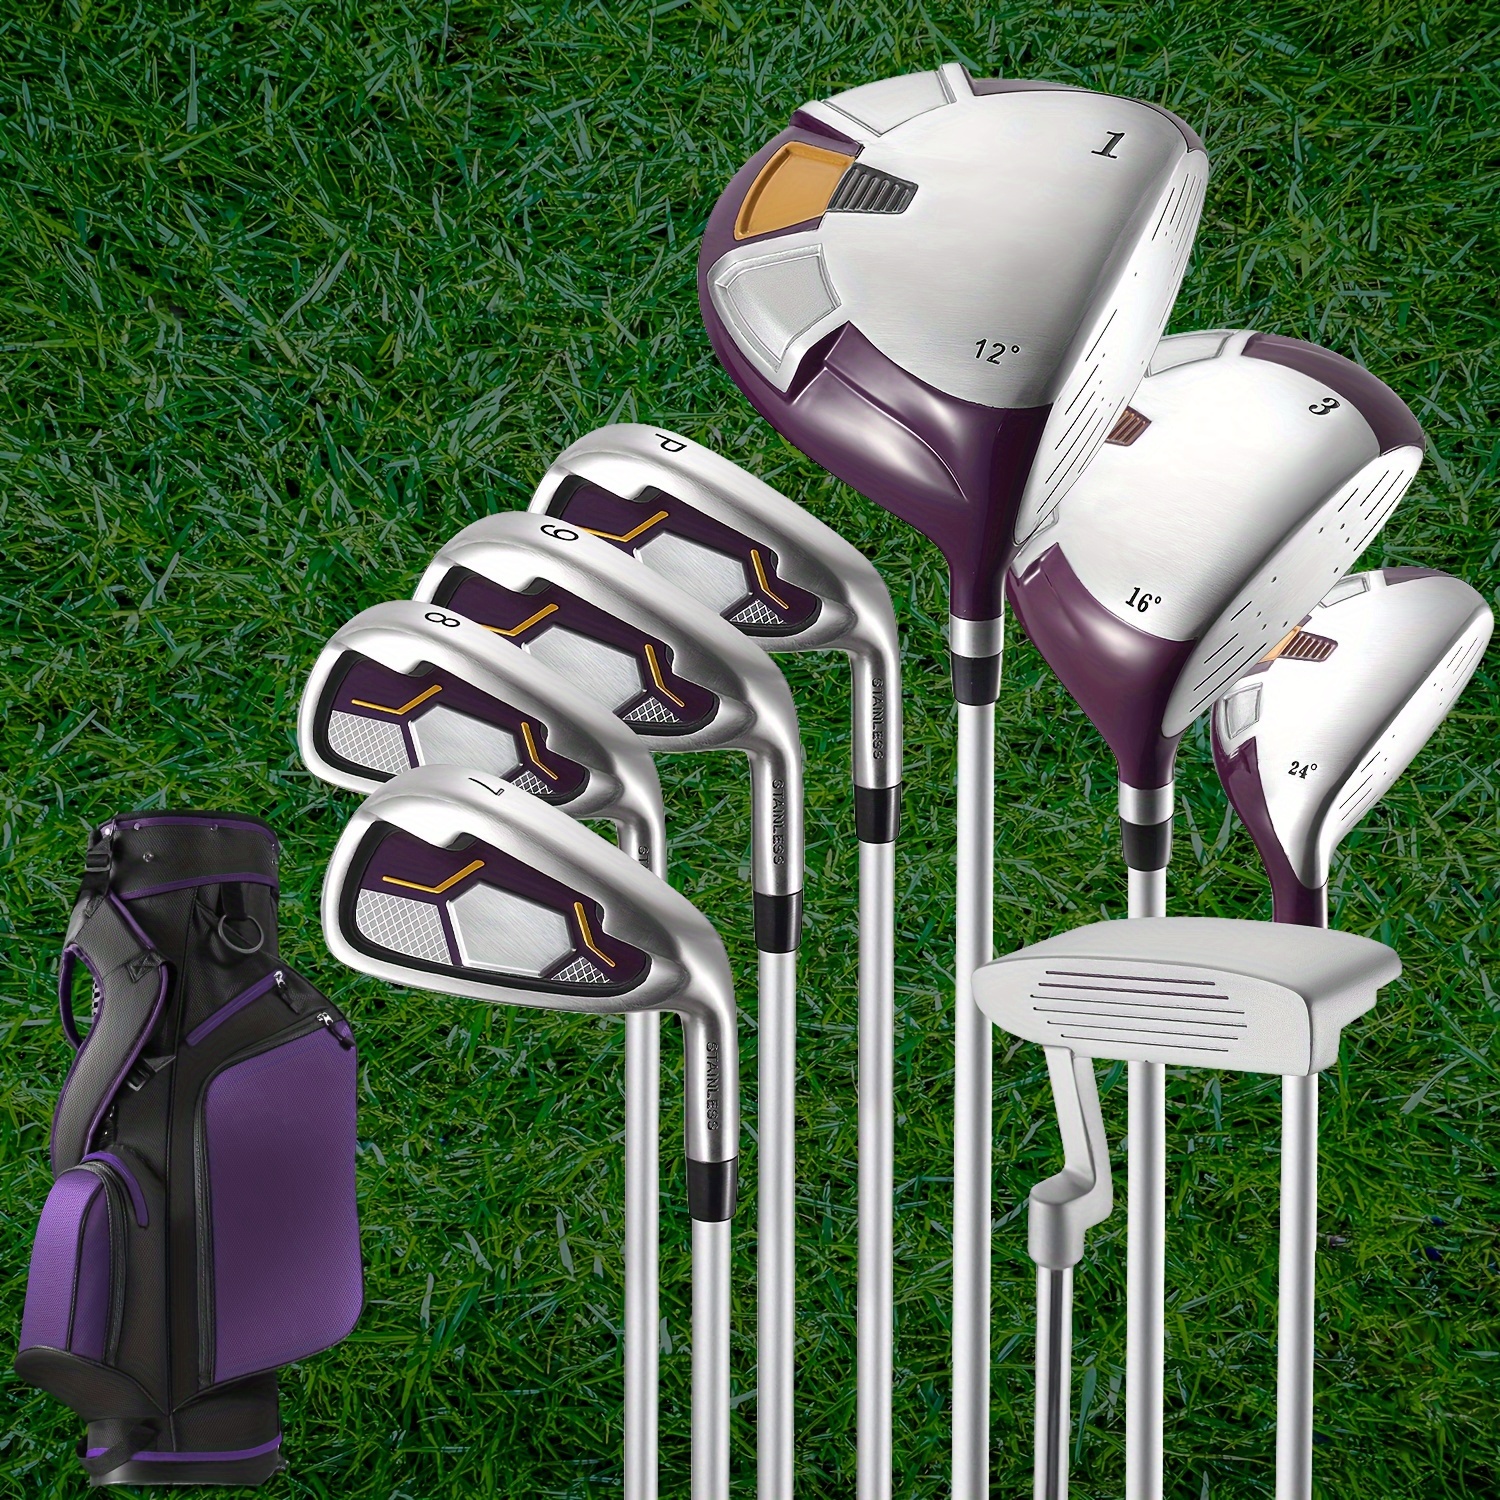 

Complete Golf Clubs Package Set Includes 8 Club Set For Men Woman Right Handed, Steel Shafts, Putter, Stand Bag & 3 H/c's Bonus Head